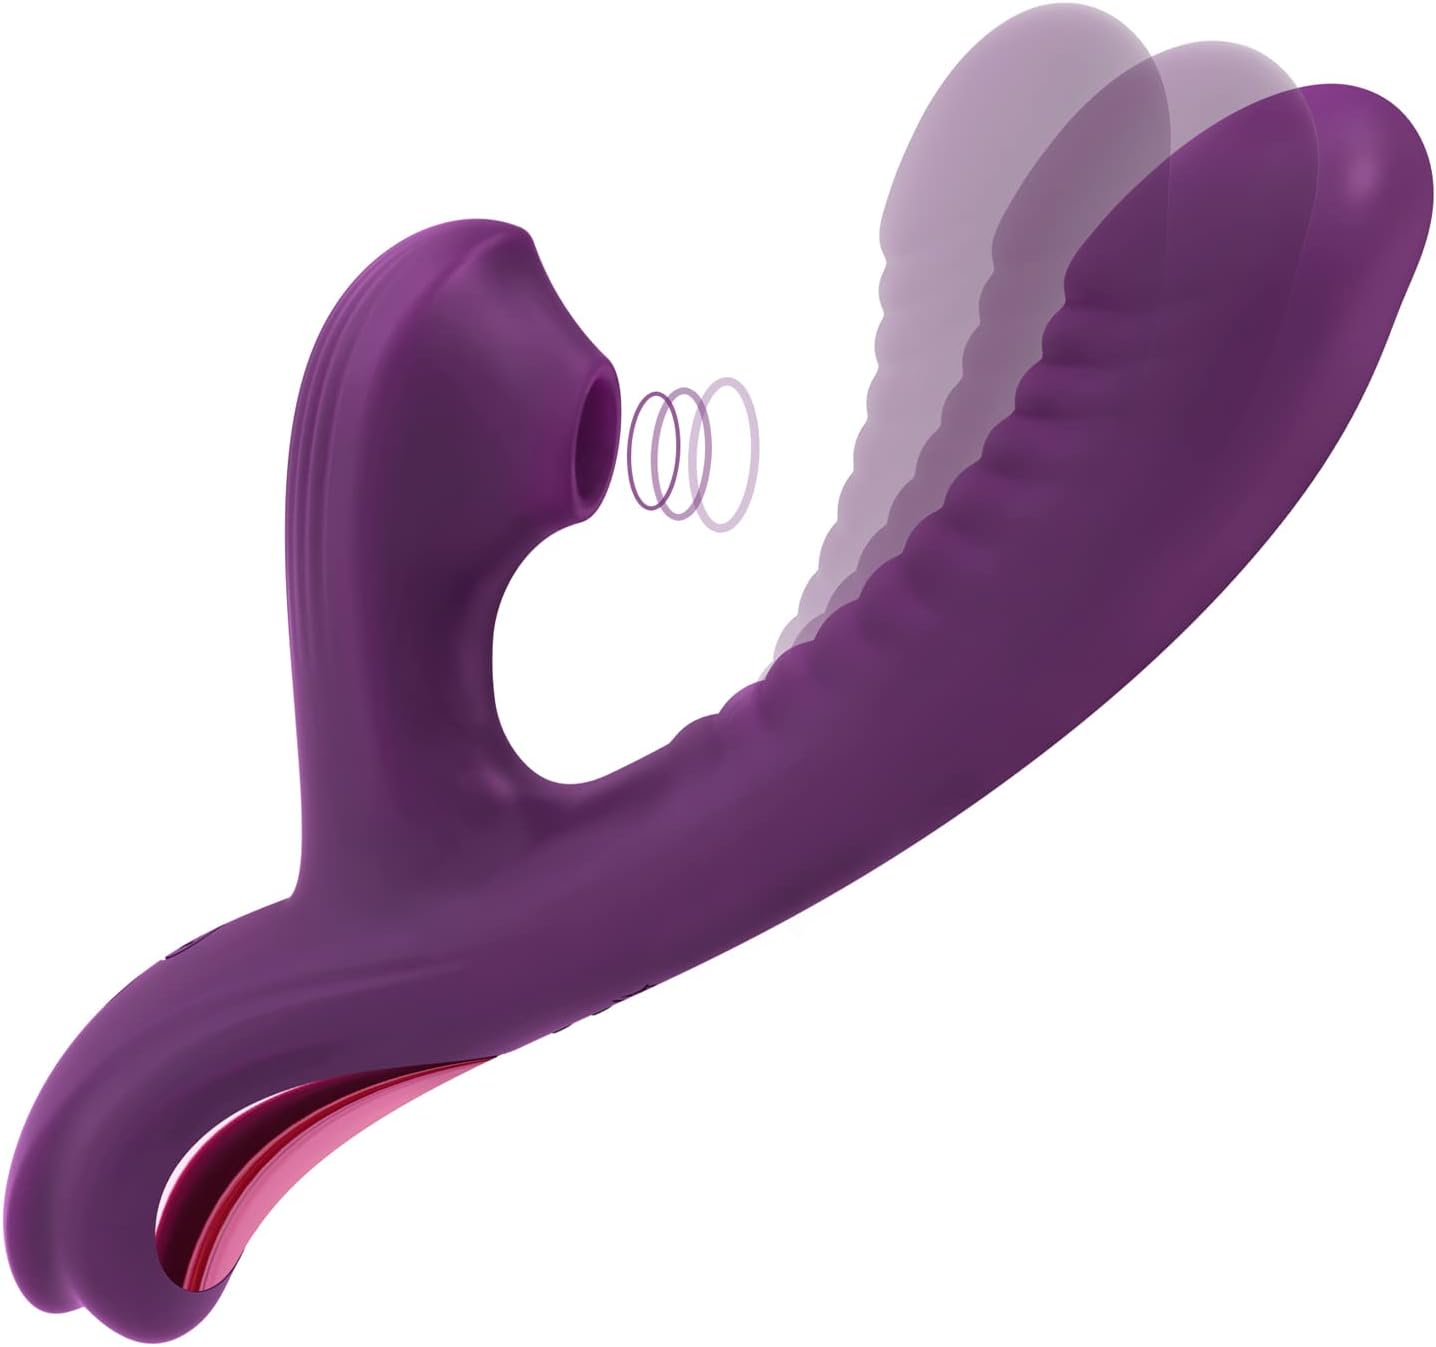 7 Types of Vibrators To Help You Find Your Pleasure in 2023